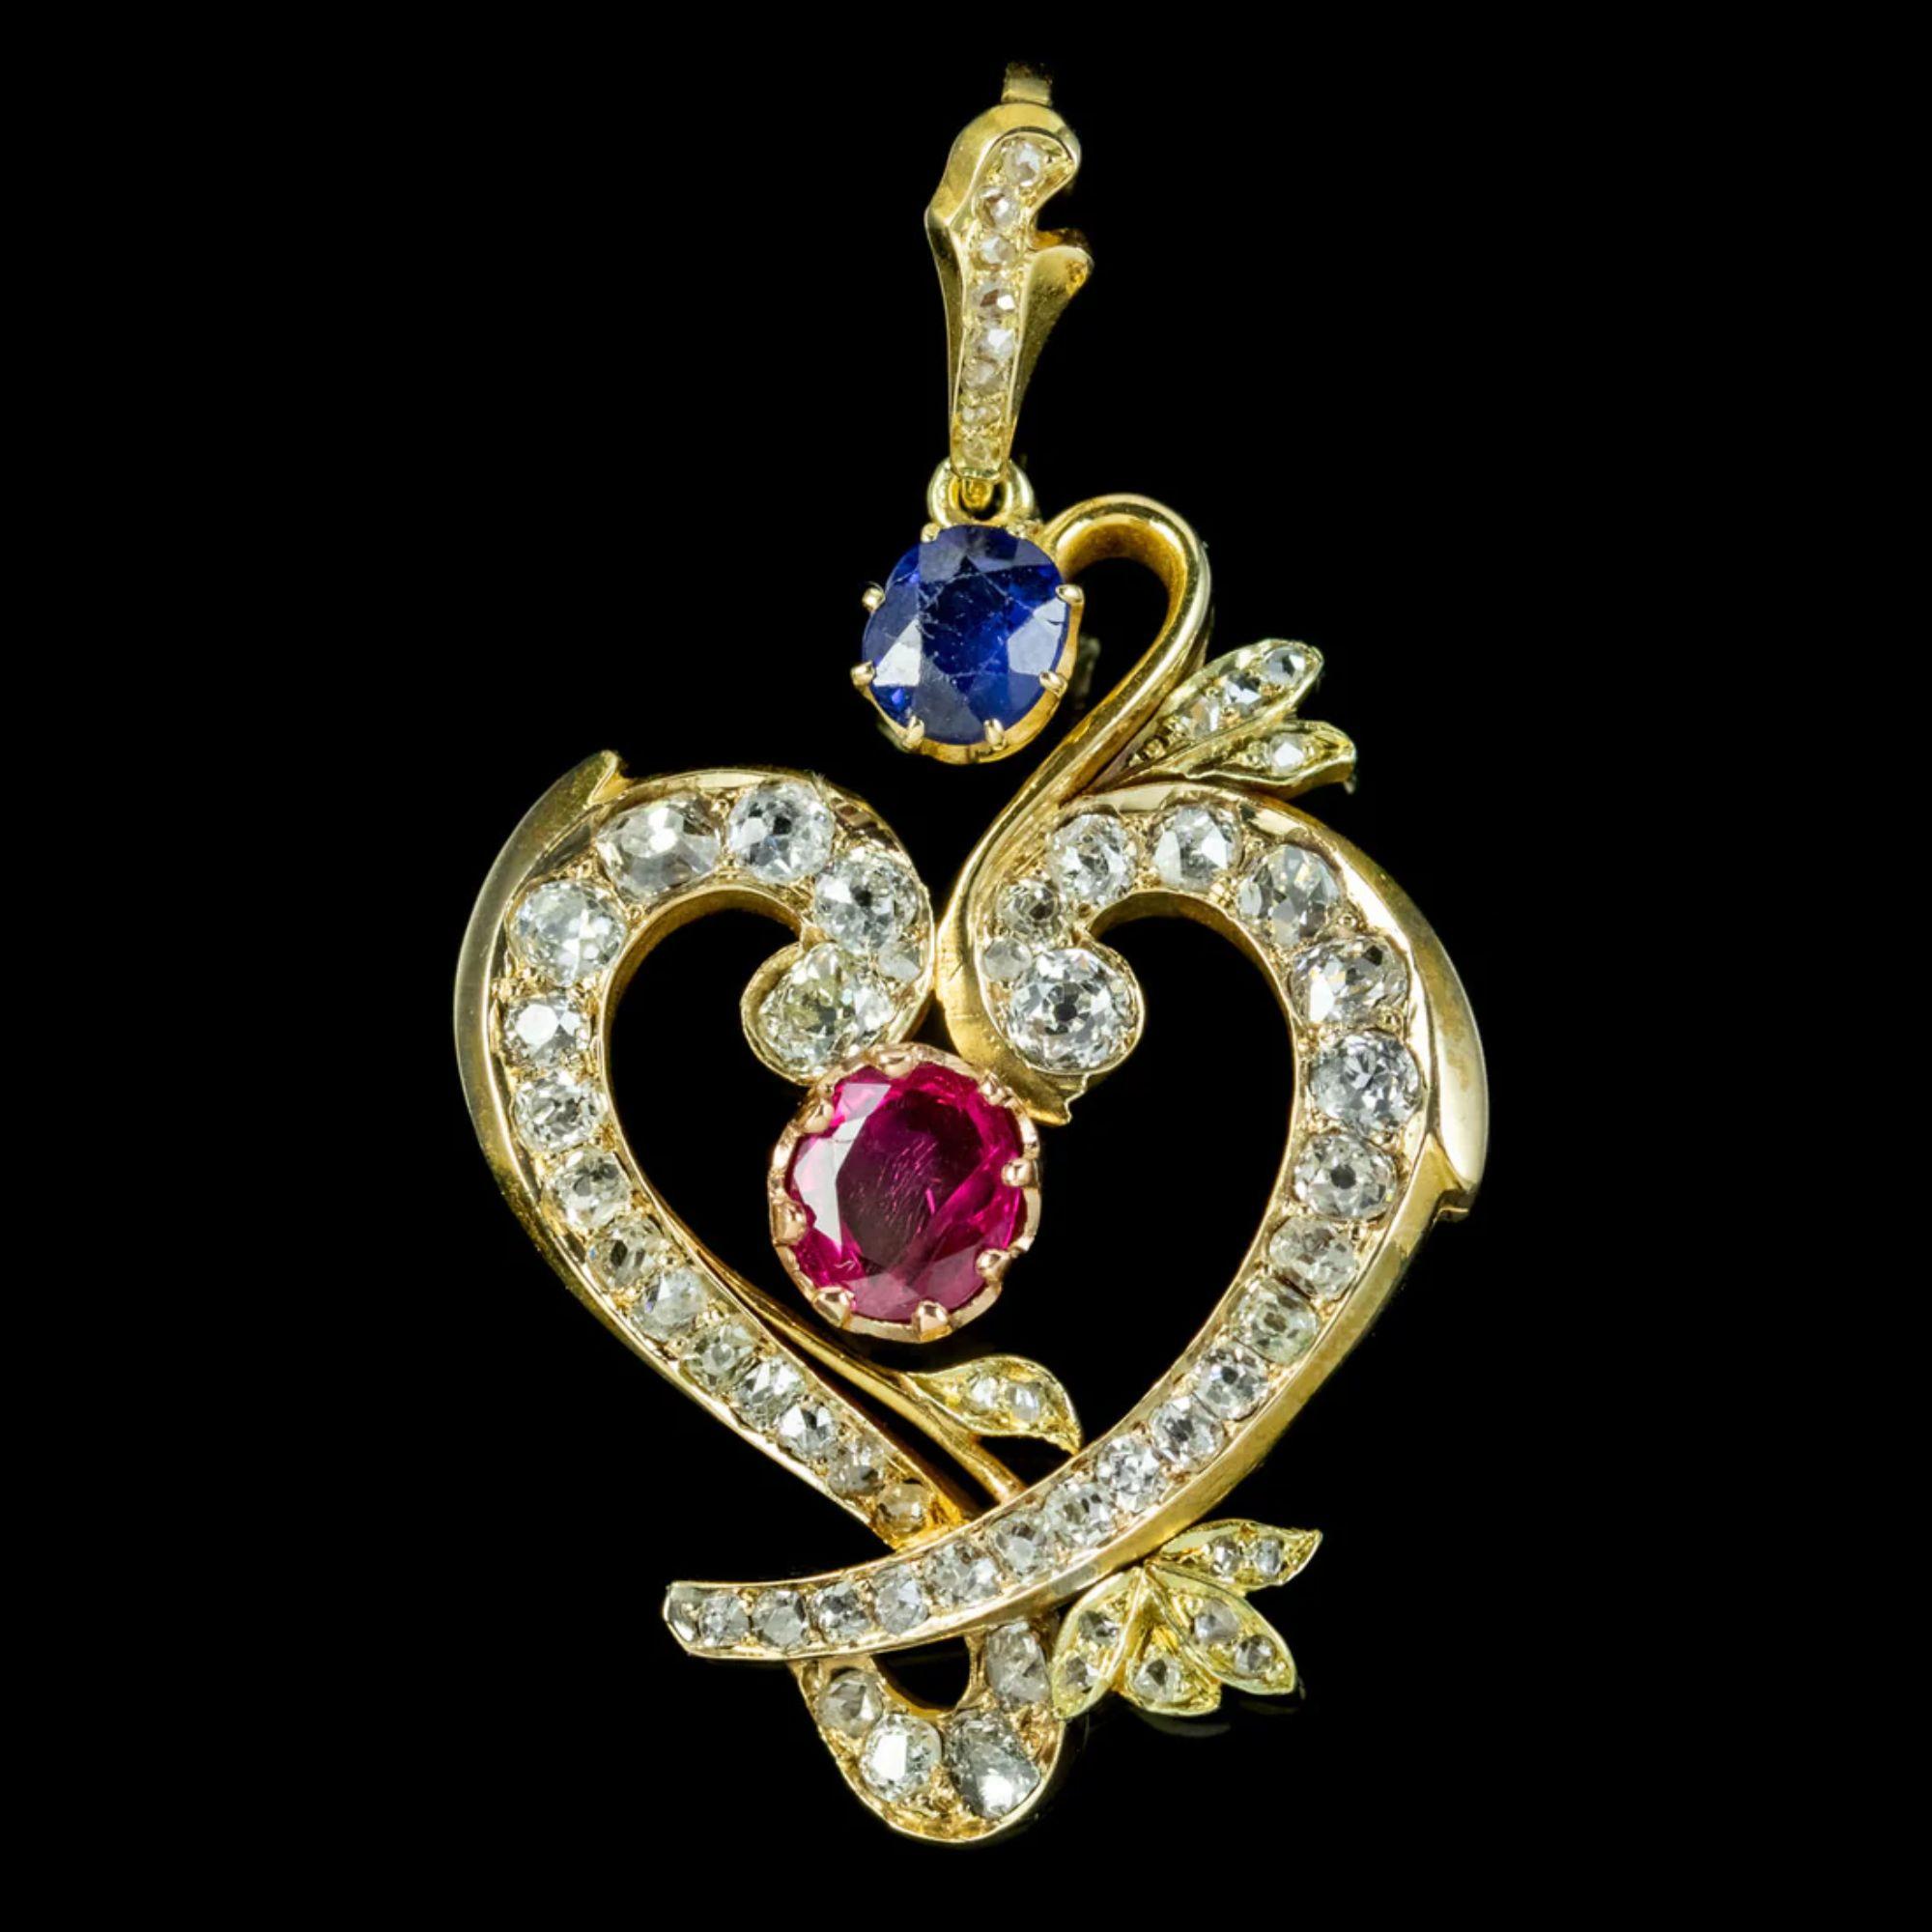 A gorgeous vintage heart pendant lined with a dazzling array of bright, old mine cut diamonds (approx. 3ct total) and claw set with a blue sapphire at the top (approx. 0.60ct) and a pink ruby in the centre (approx. 0.90ct).

The piece is all 18ct